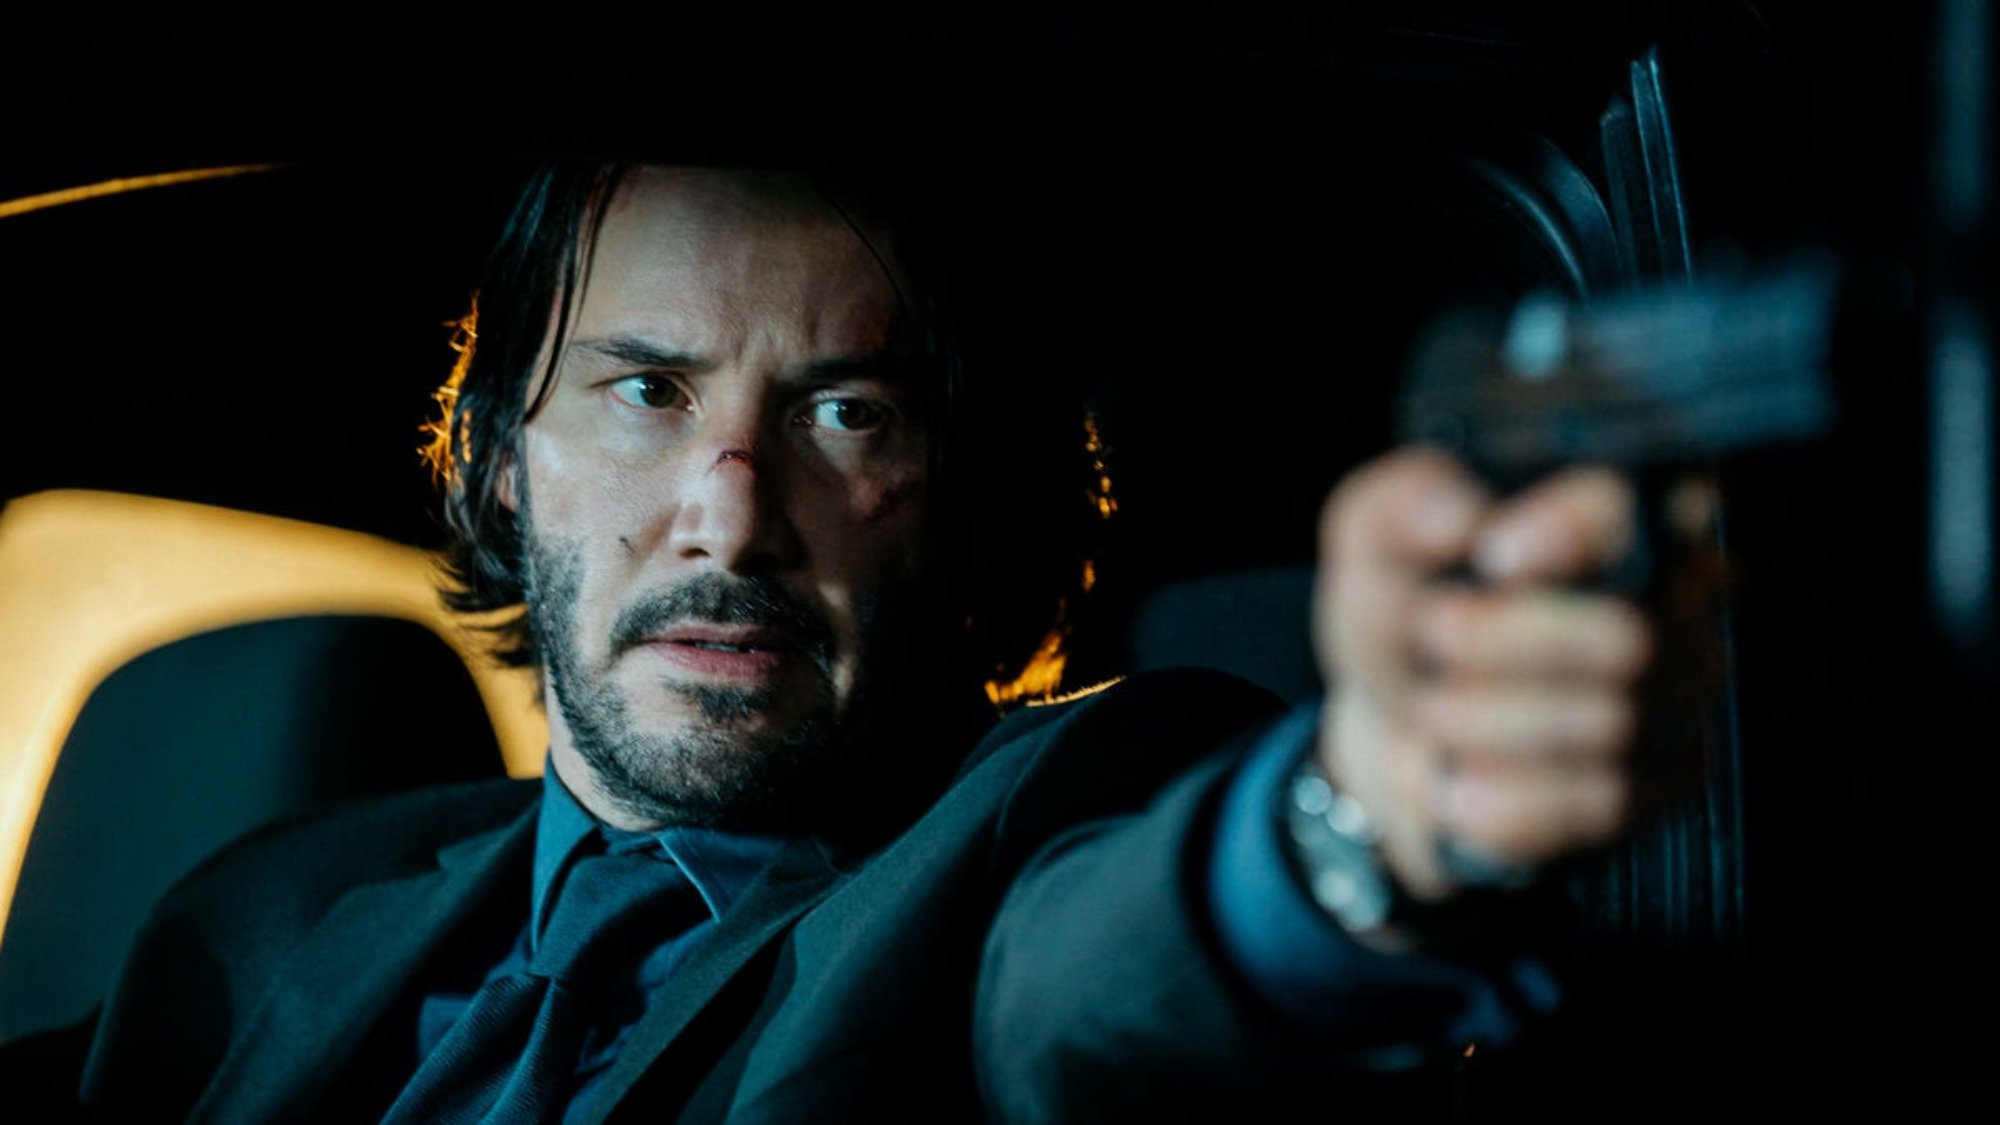 'John Wick' movies ranked Keanu Reeves as John Wick. He's sitting in a car, holding a pistol outward with cuts on his face.